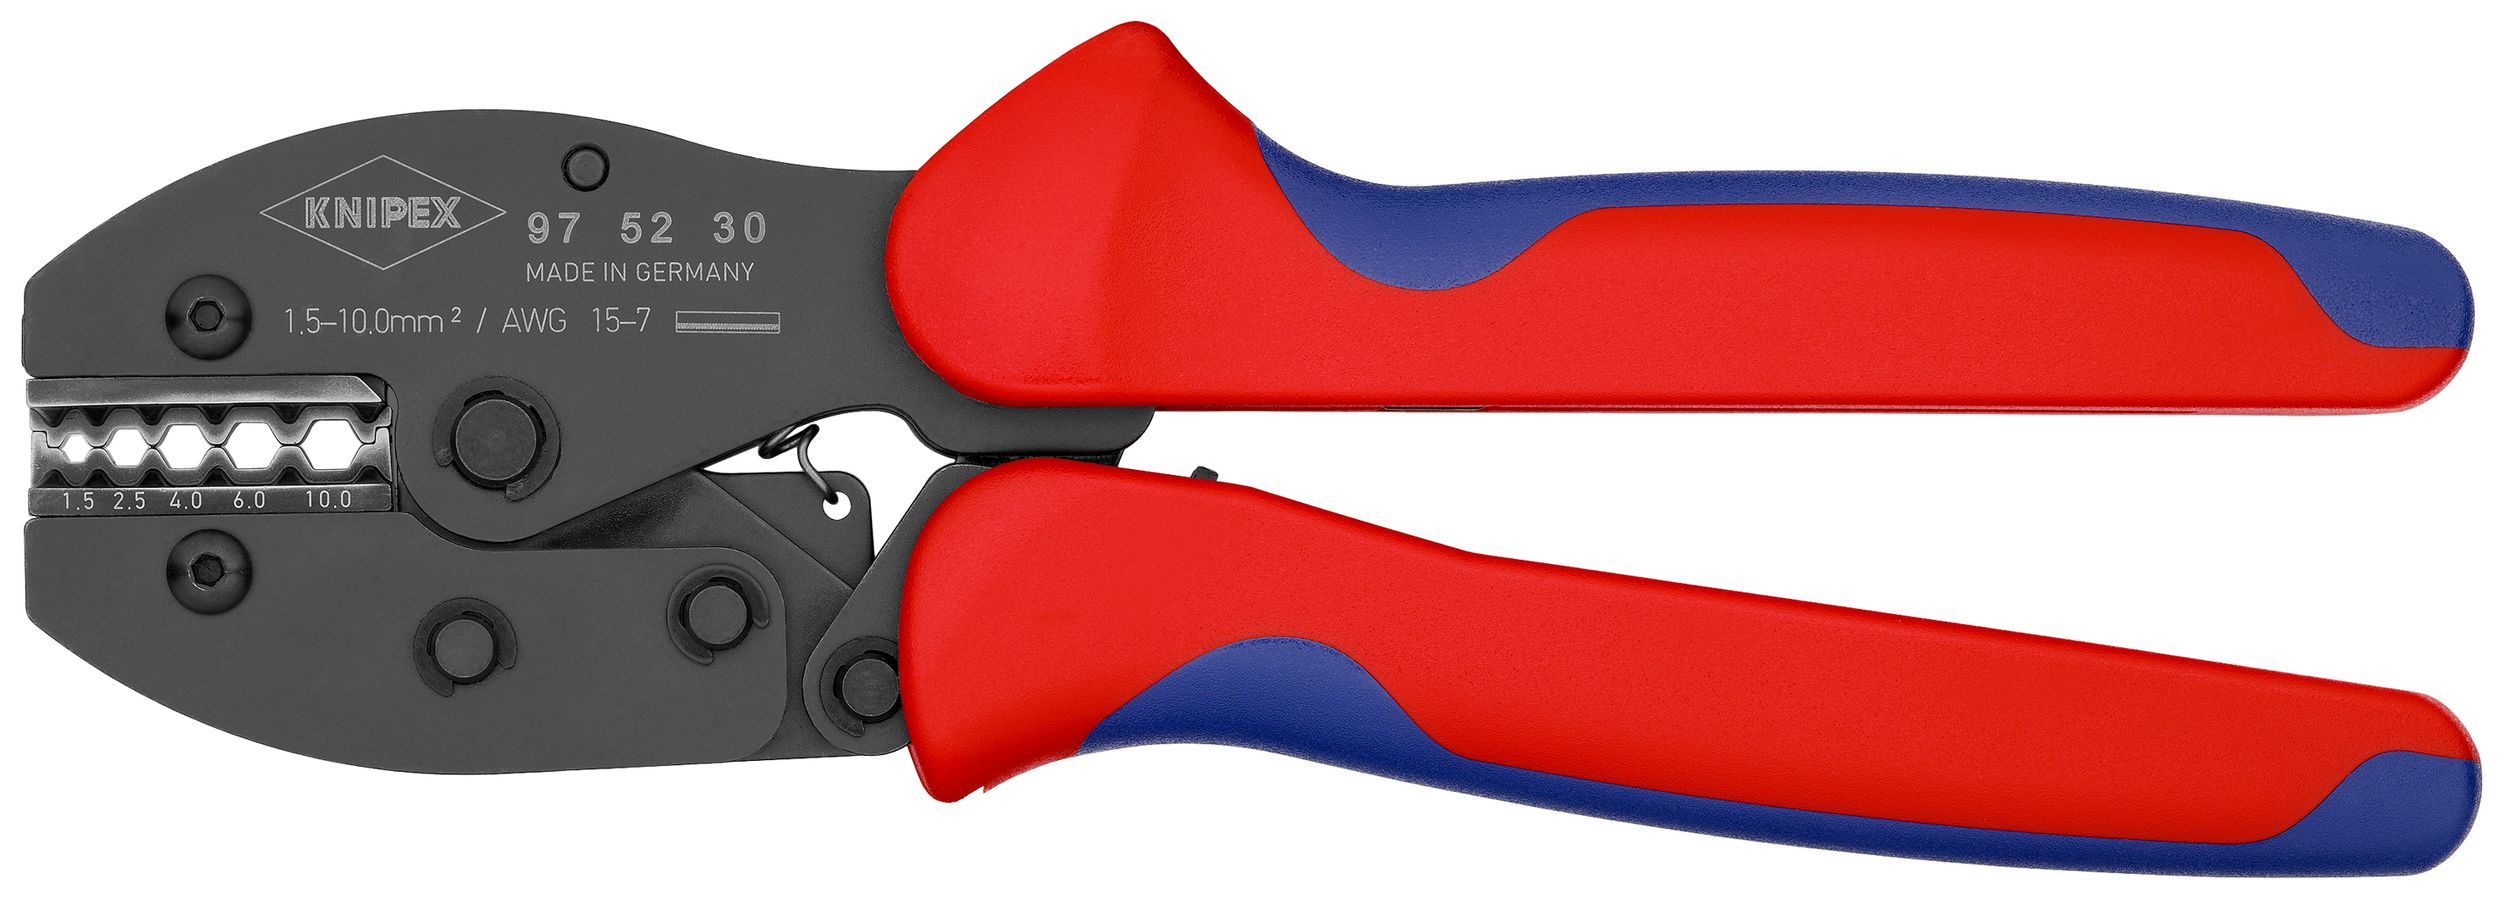 Crimping Pliers For Non-Insulated Crimp Connectors | KNIPEX Tools